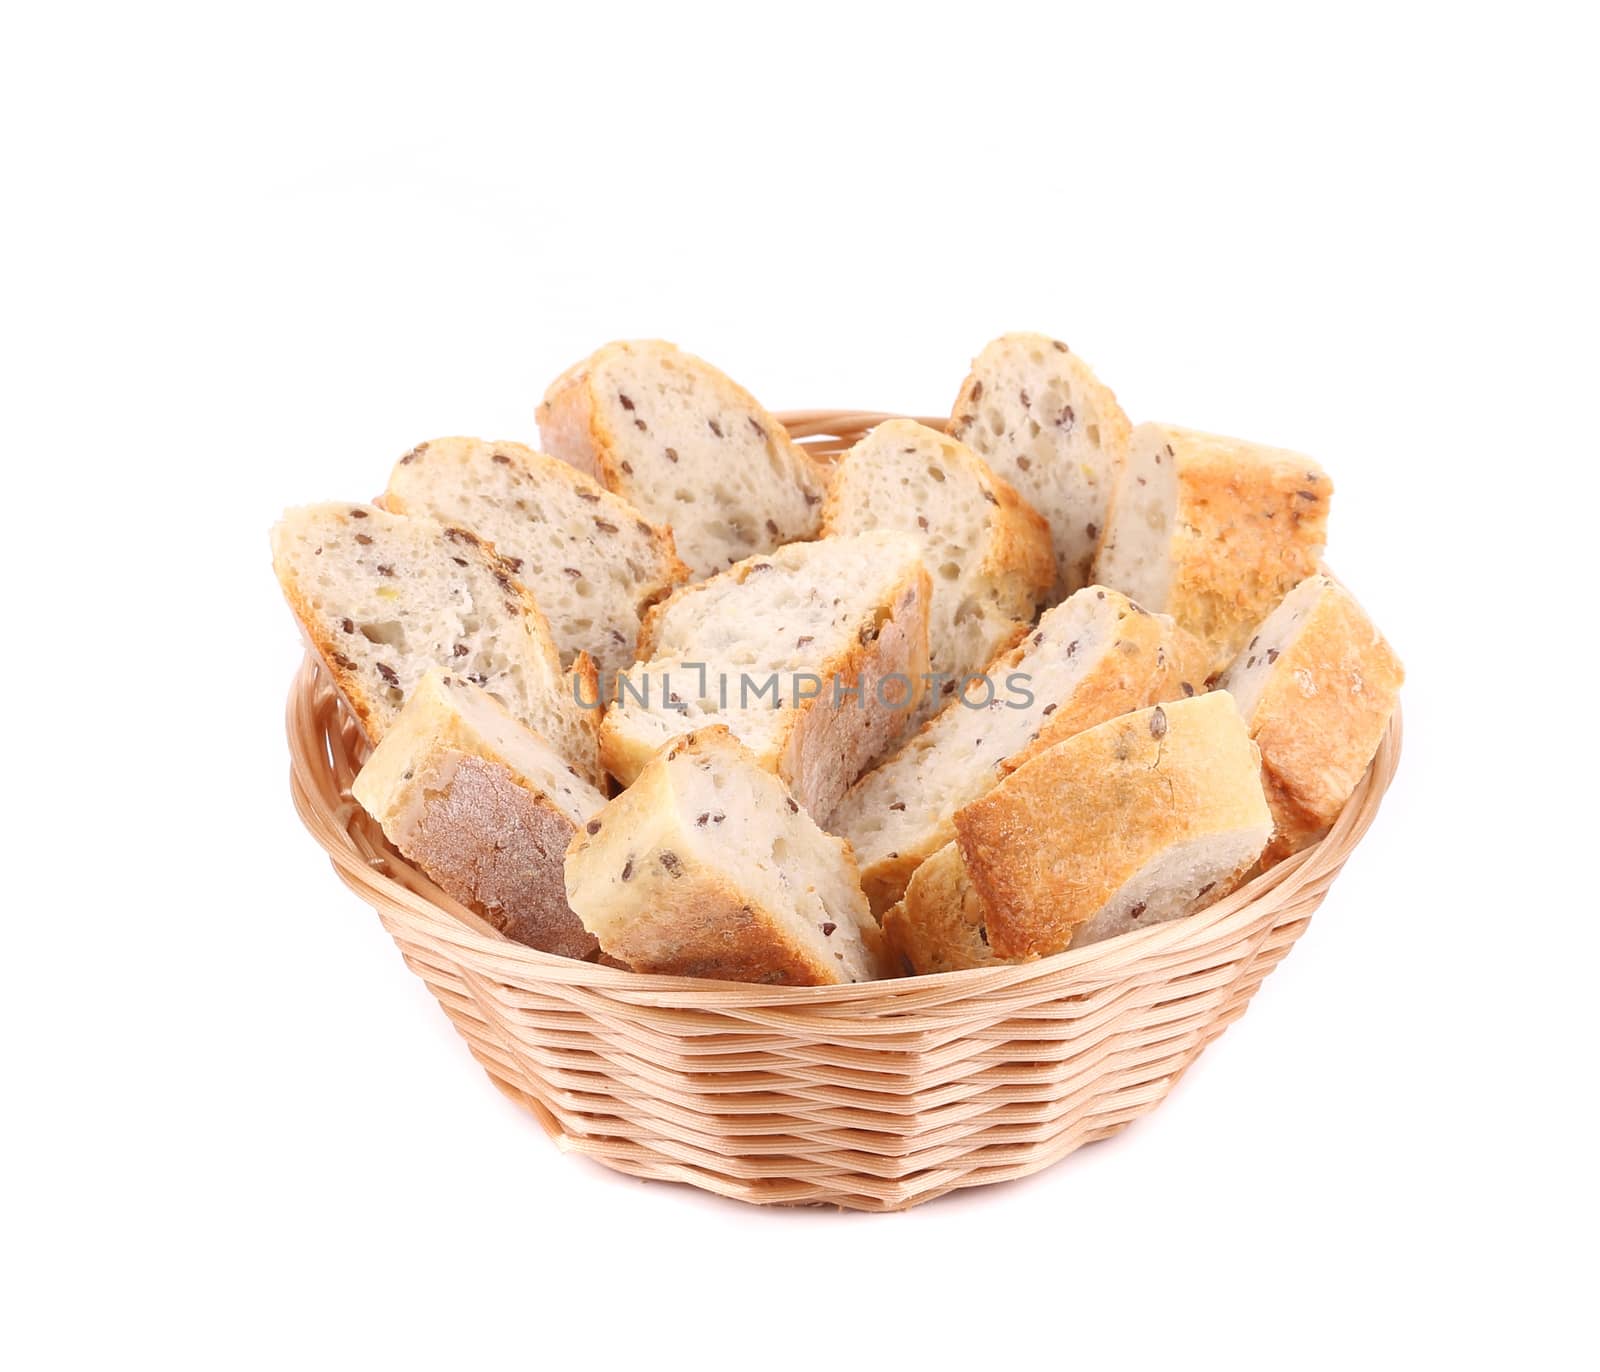 Wicker basket with bread slices. Isolated on a white background.